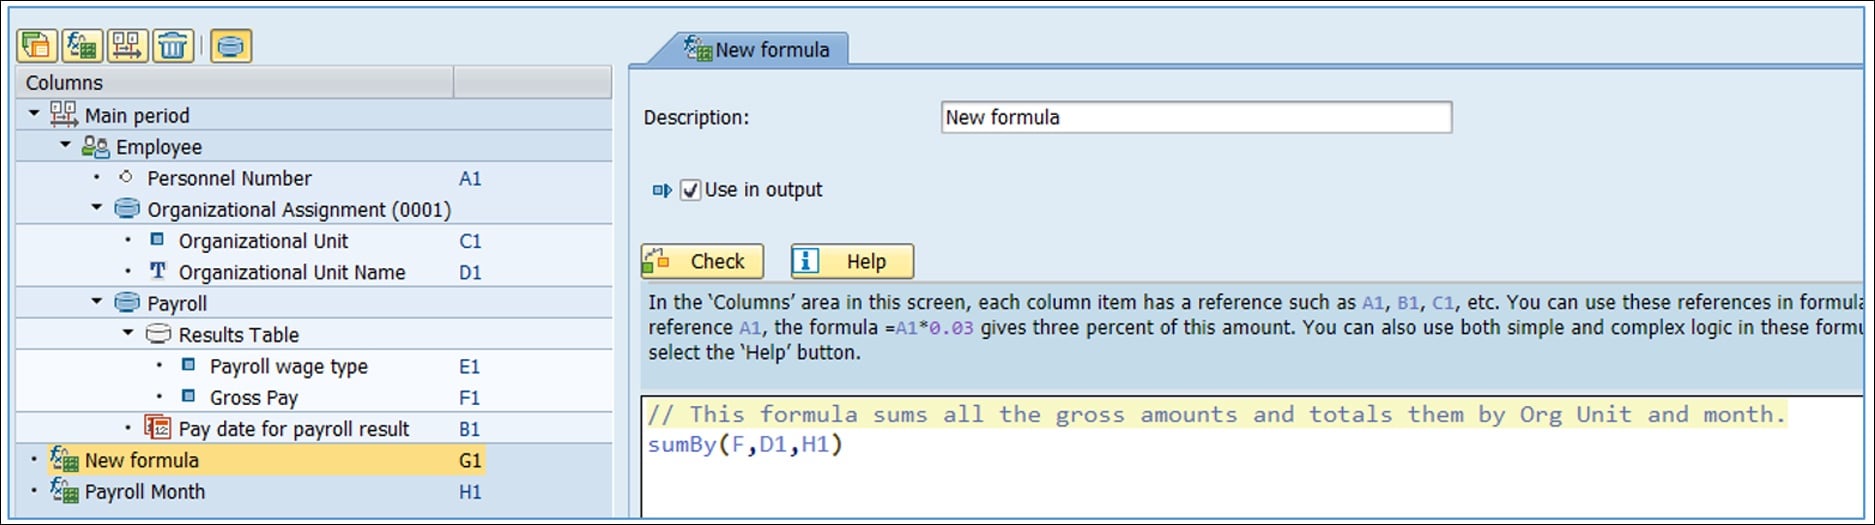 The second formula creates the total gross pay, subtotaled by Org Unit and by month. Also, this formula is using the output of the earlier formula as one of its parameters. Query Manager knows to execute the first formula before the second